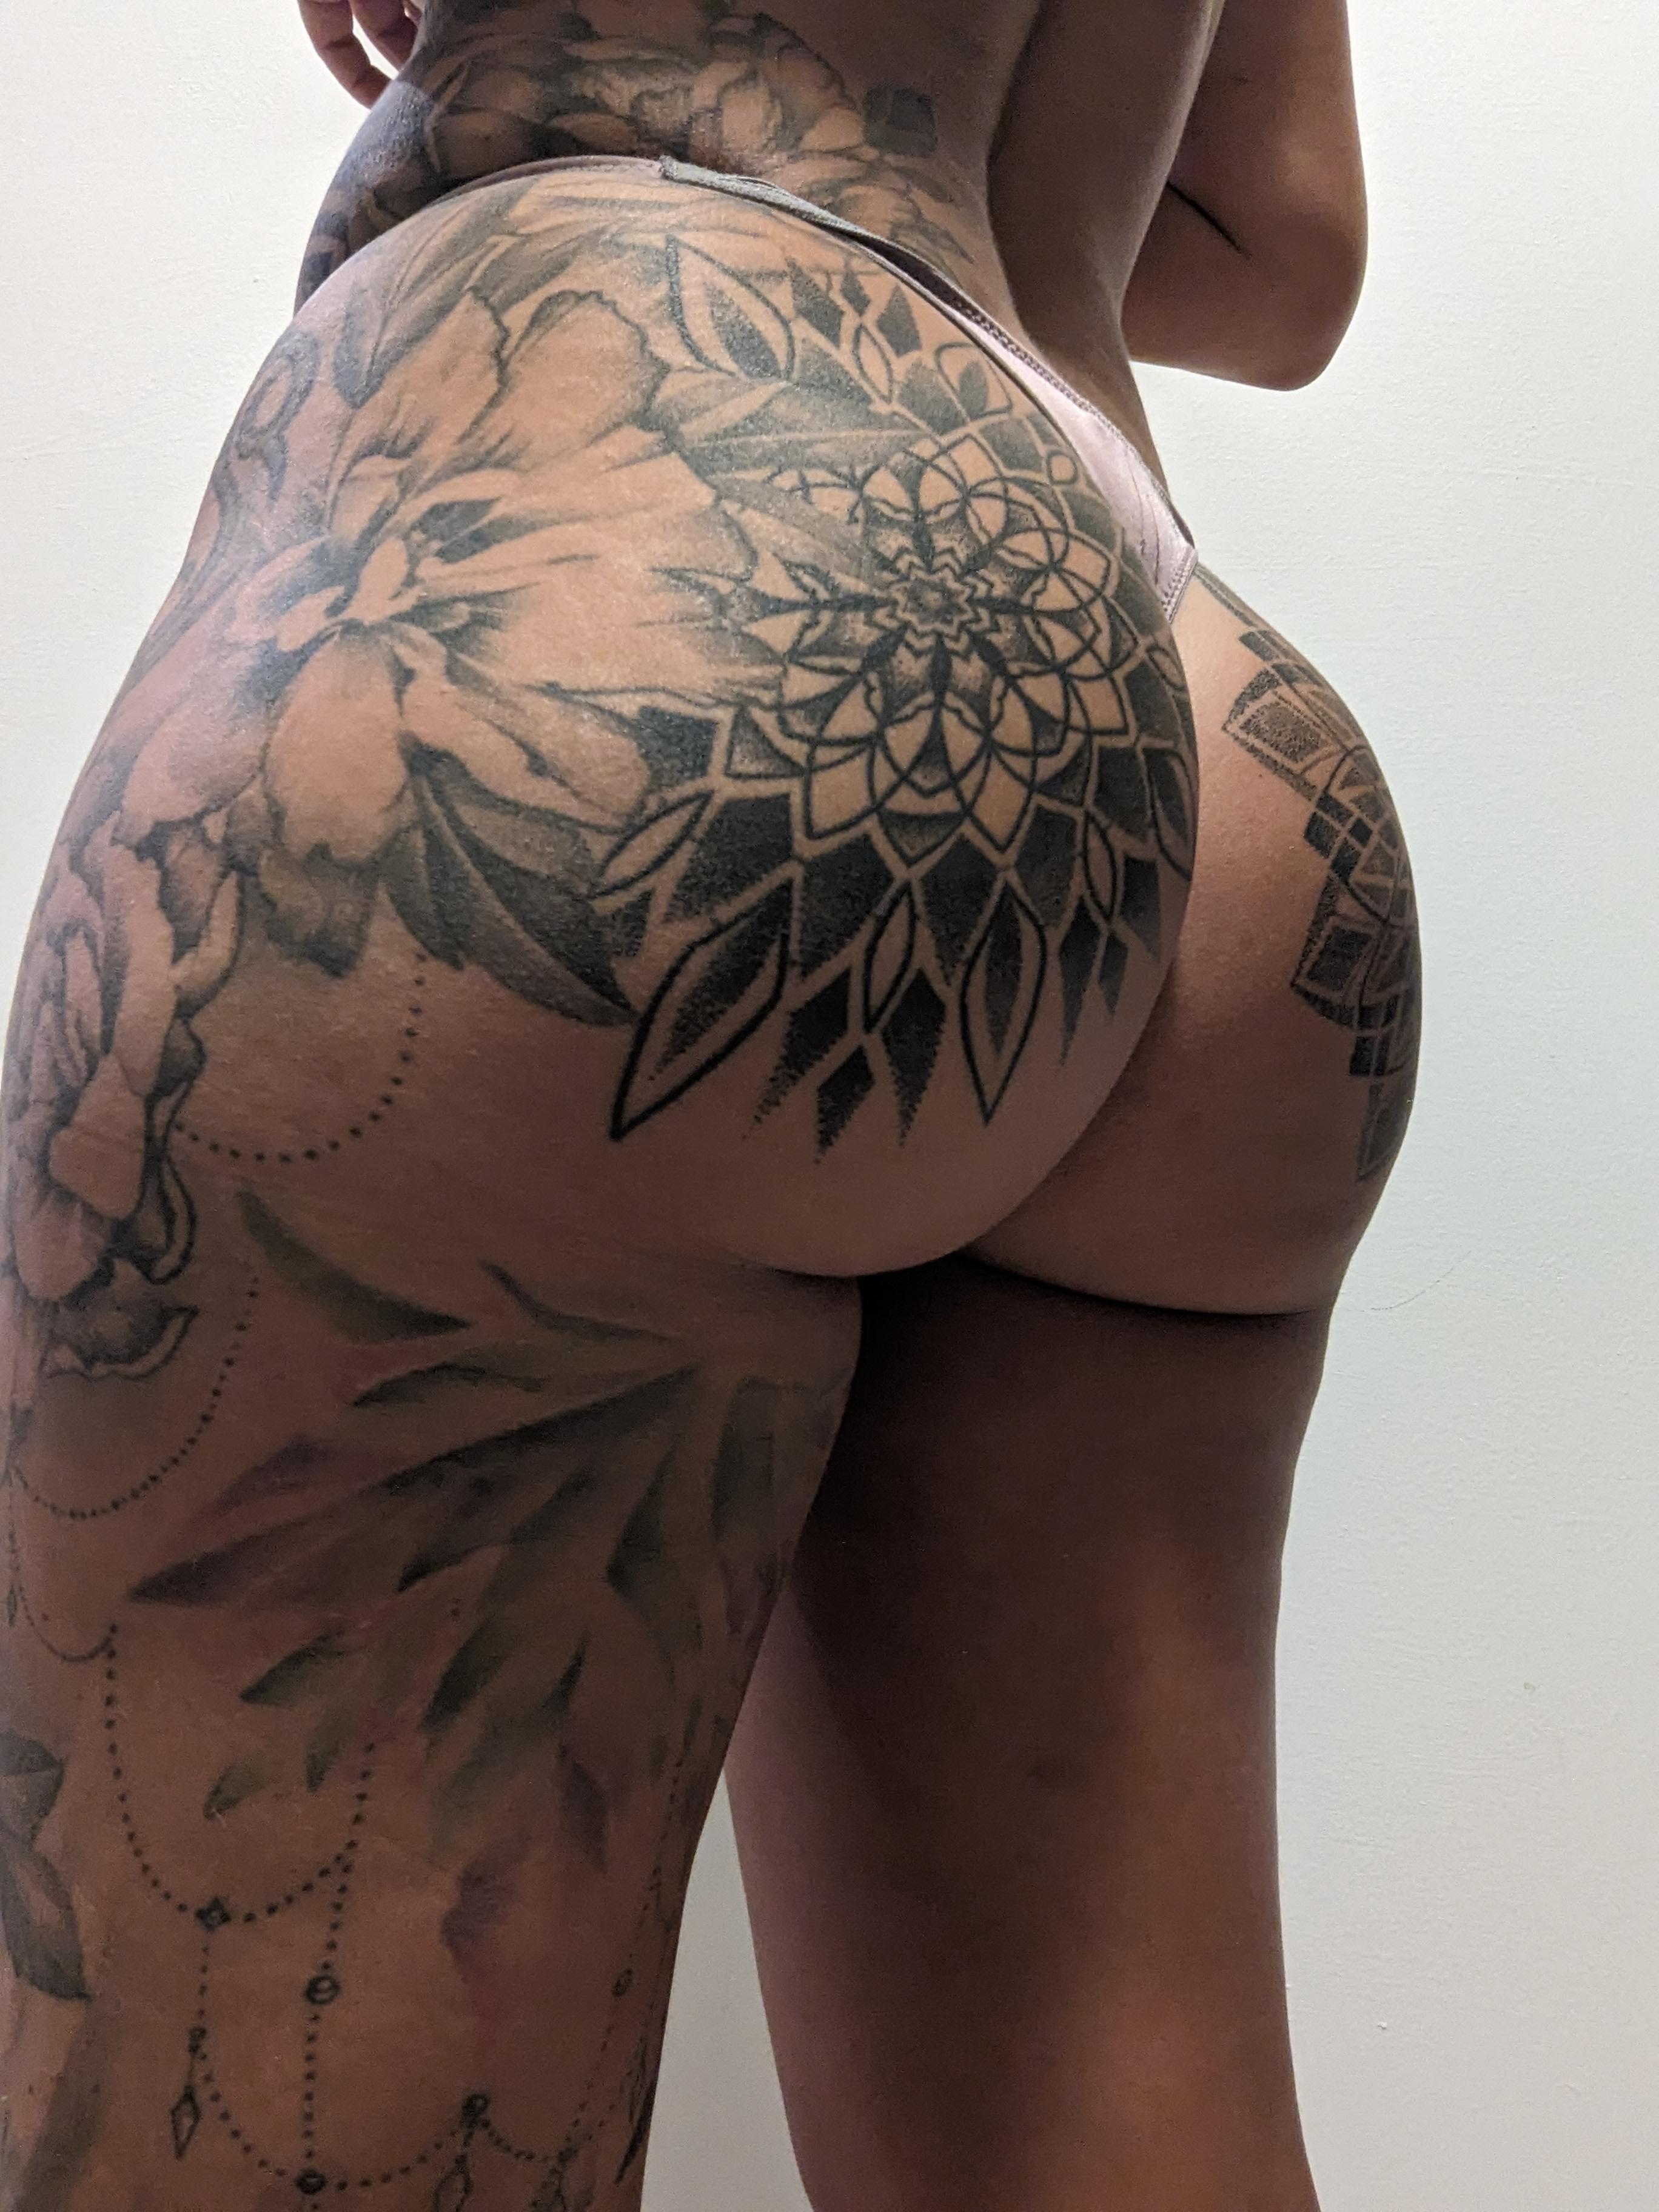 PAWG more and more tattoos are coming